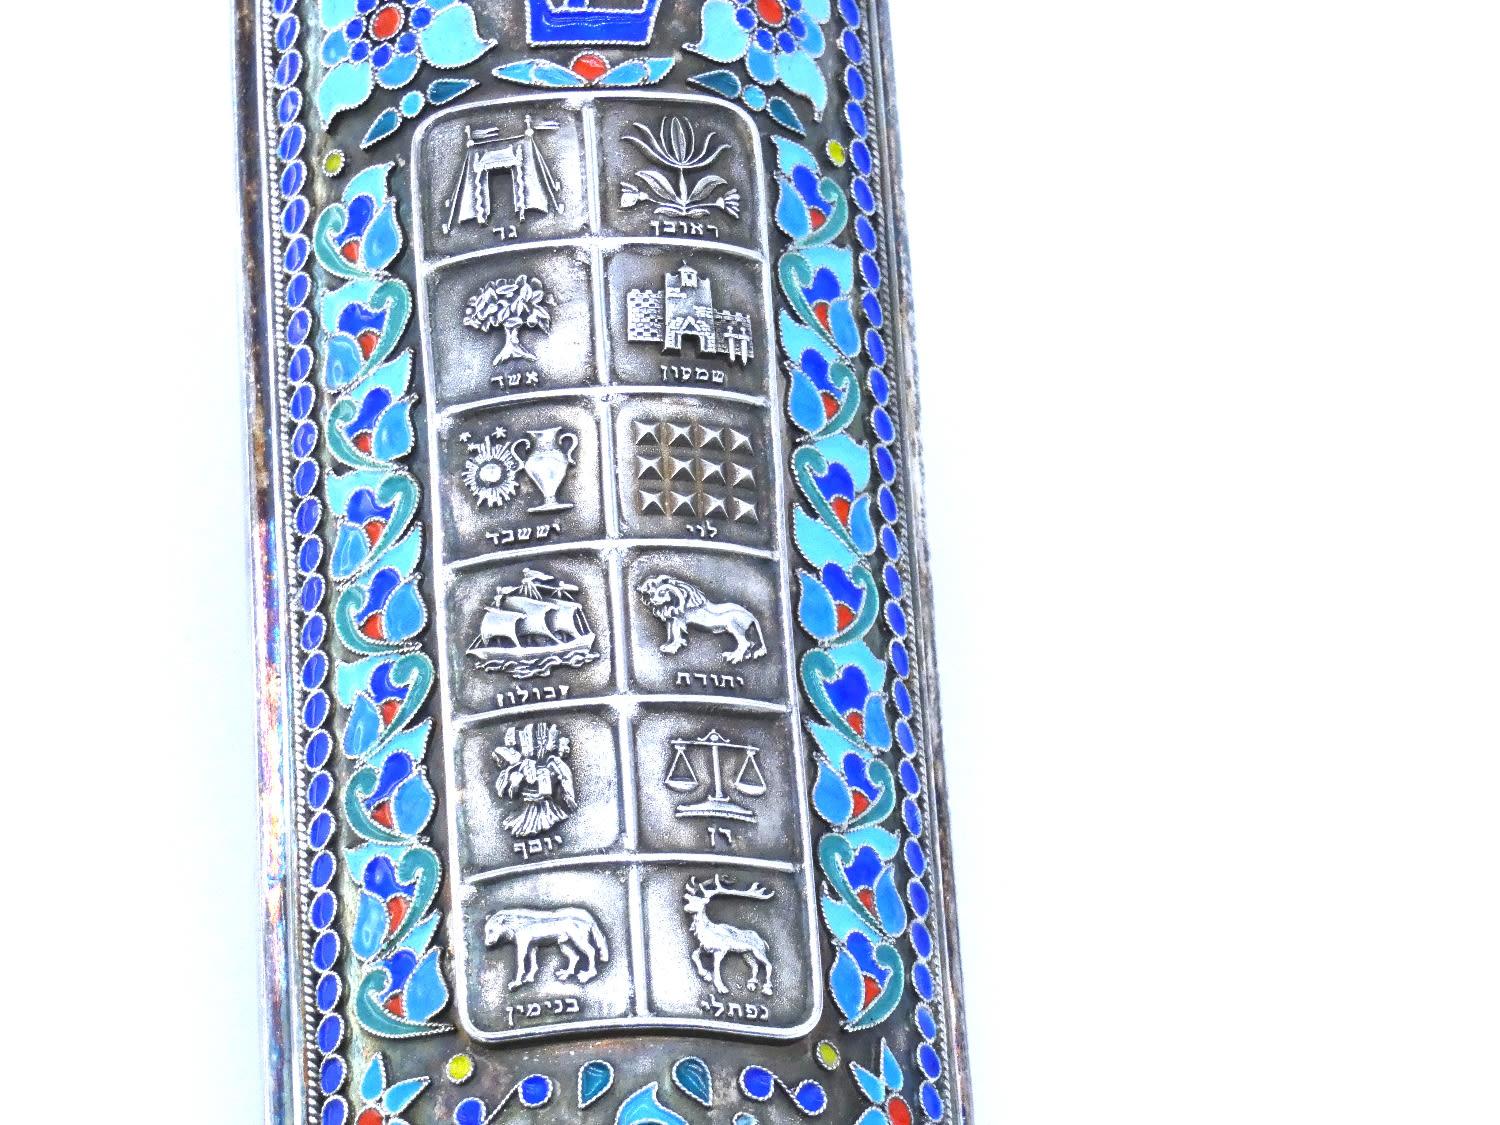 A Large Silver Enamel Mezuzah Case, Henryk Winograd, New York 1996

Decorated with beautiful blue anemones in enamel surrounded by blue pearl-beaded design in enamel. Centered by a rectangular plaque with names and symbols of each of the twelve